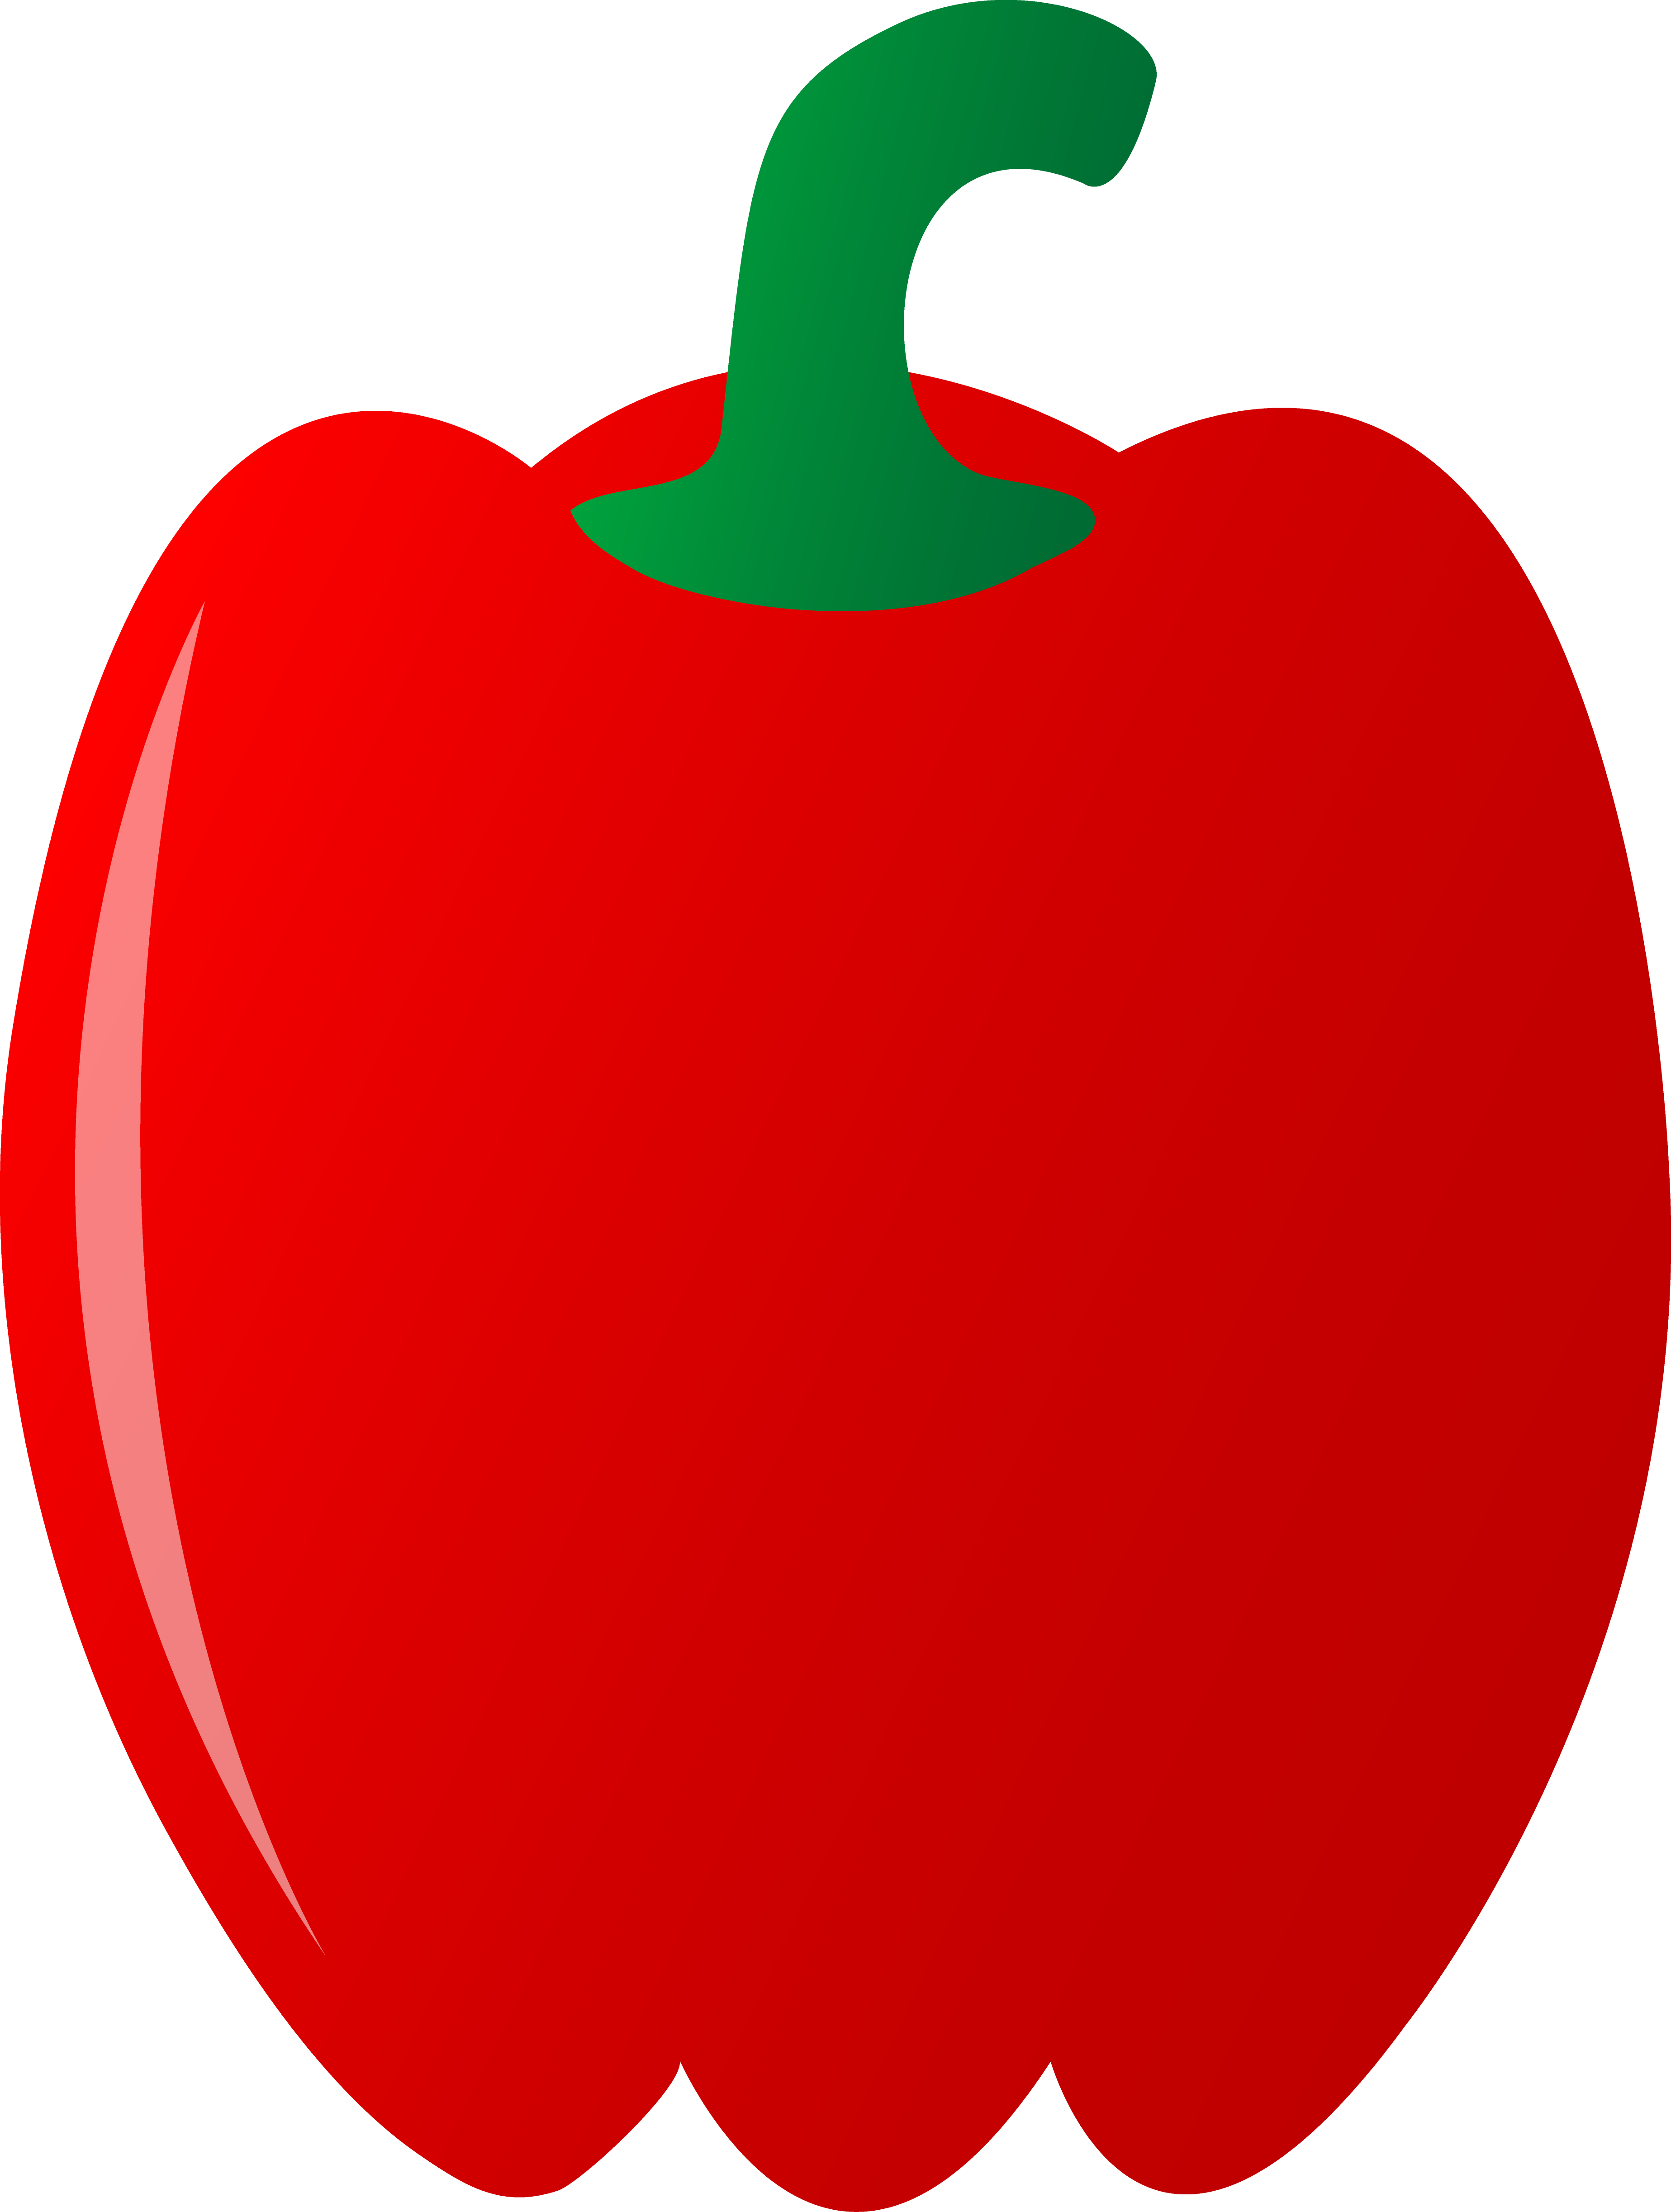 Bell Pepper Clipart Images  Pictures - Becuo